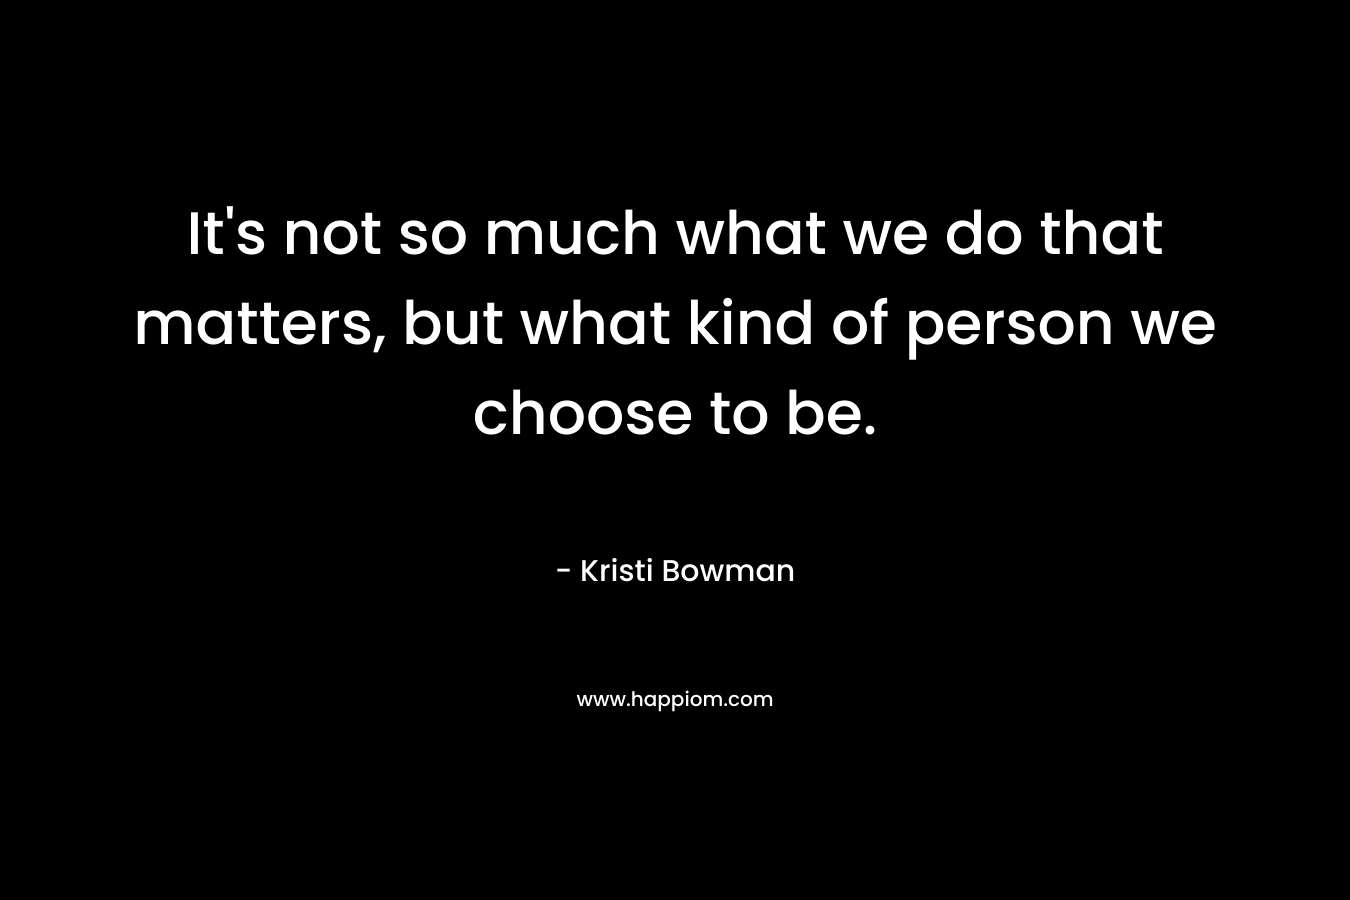 It’s not so much what we do that matters, but what kind of person we choose to be. – Kristi Bowman